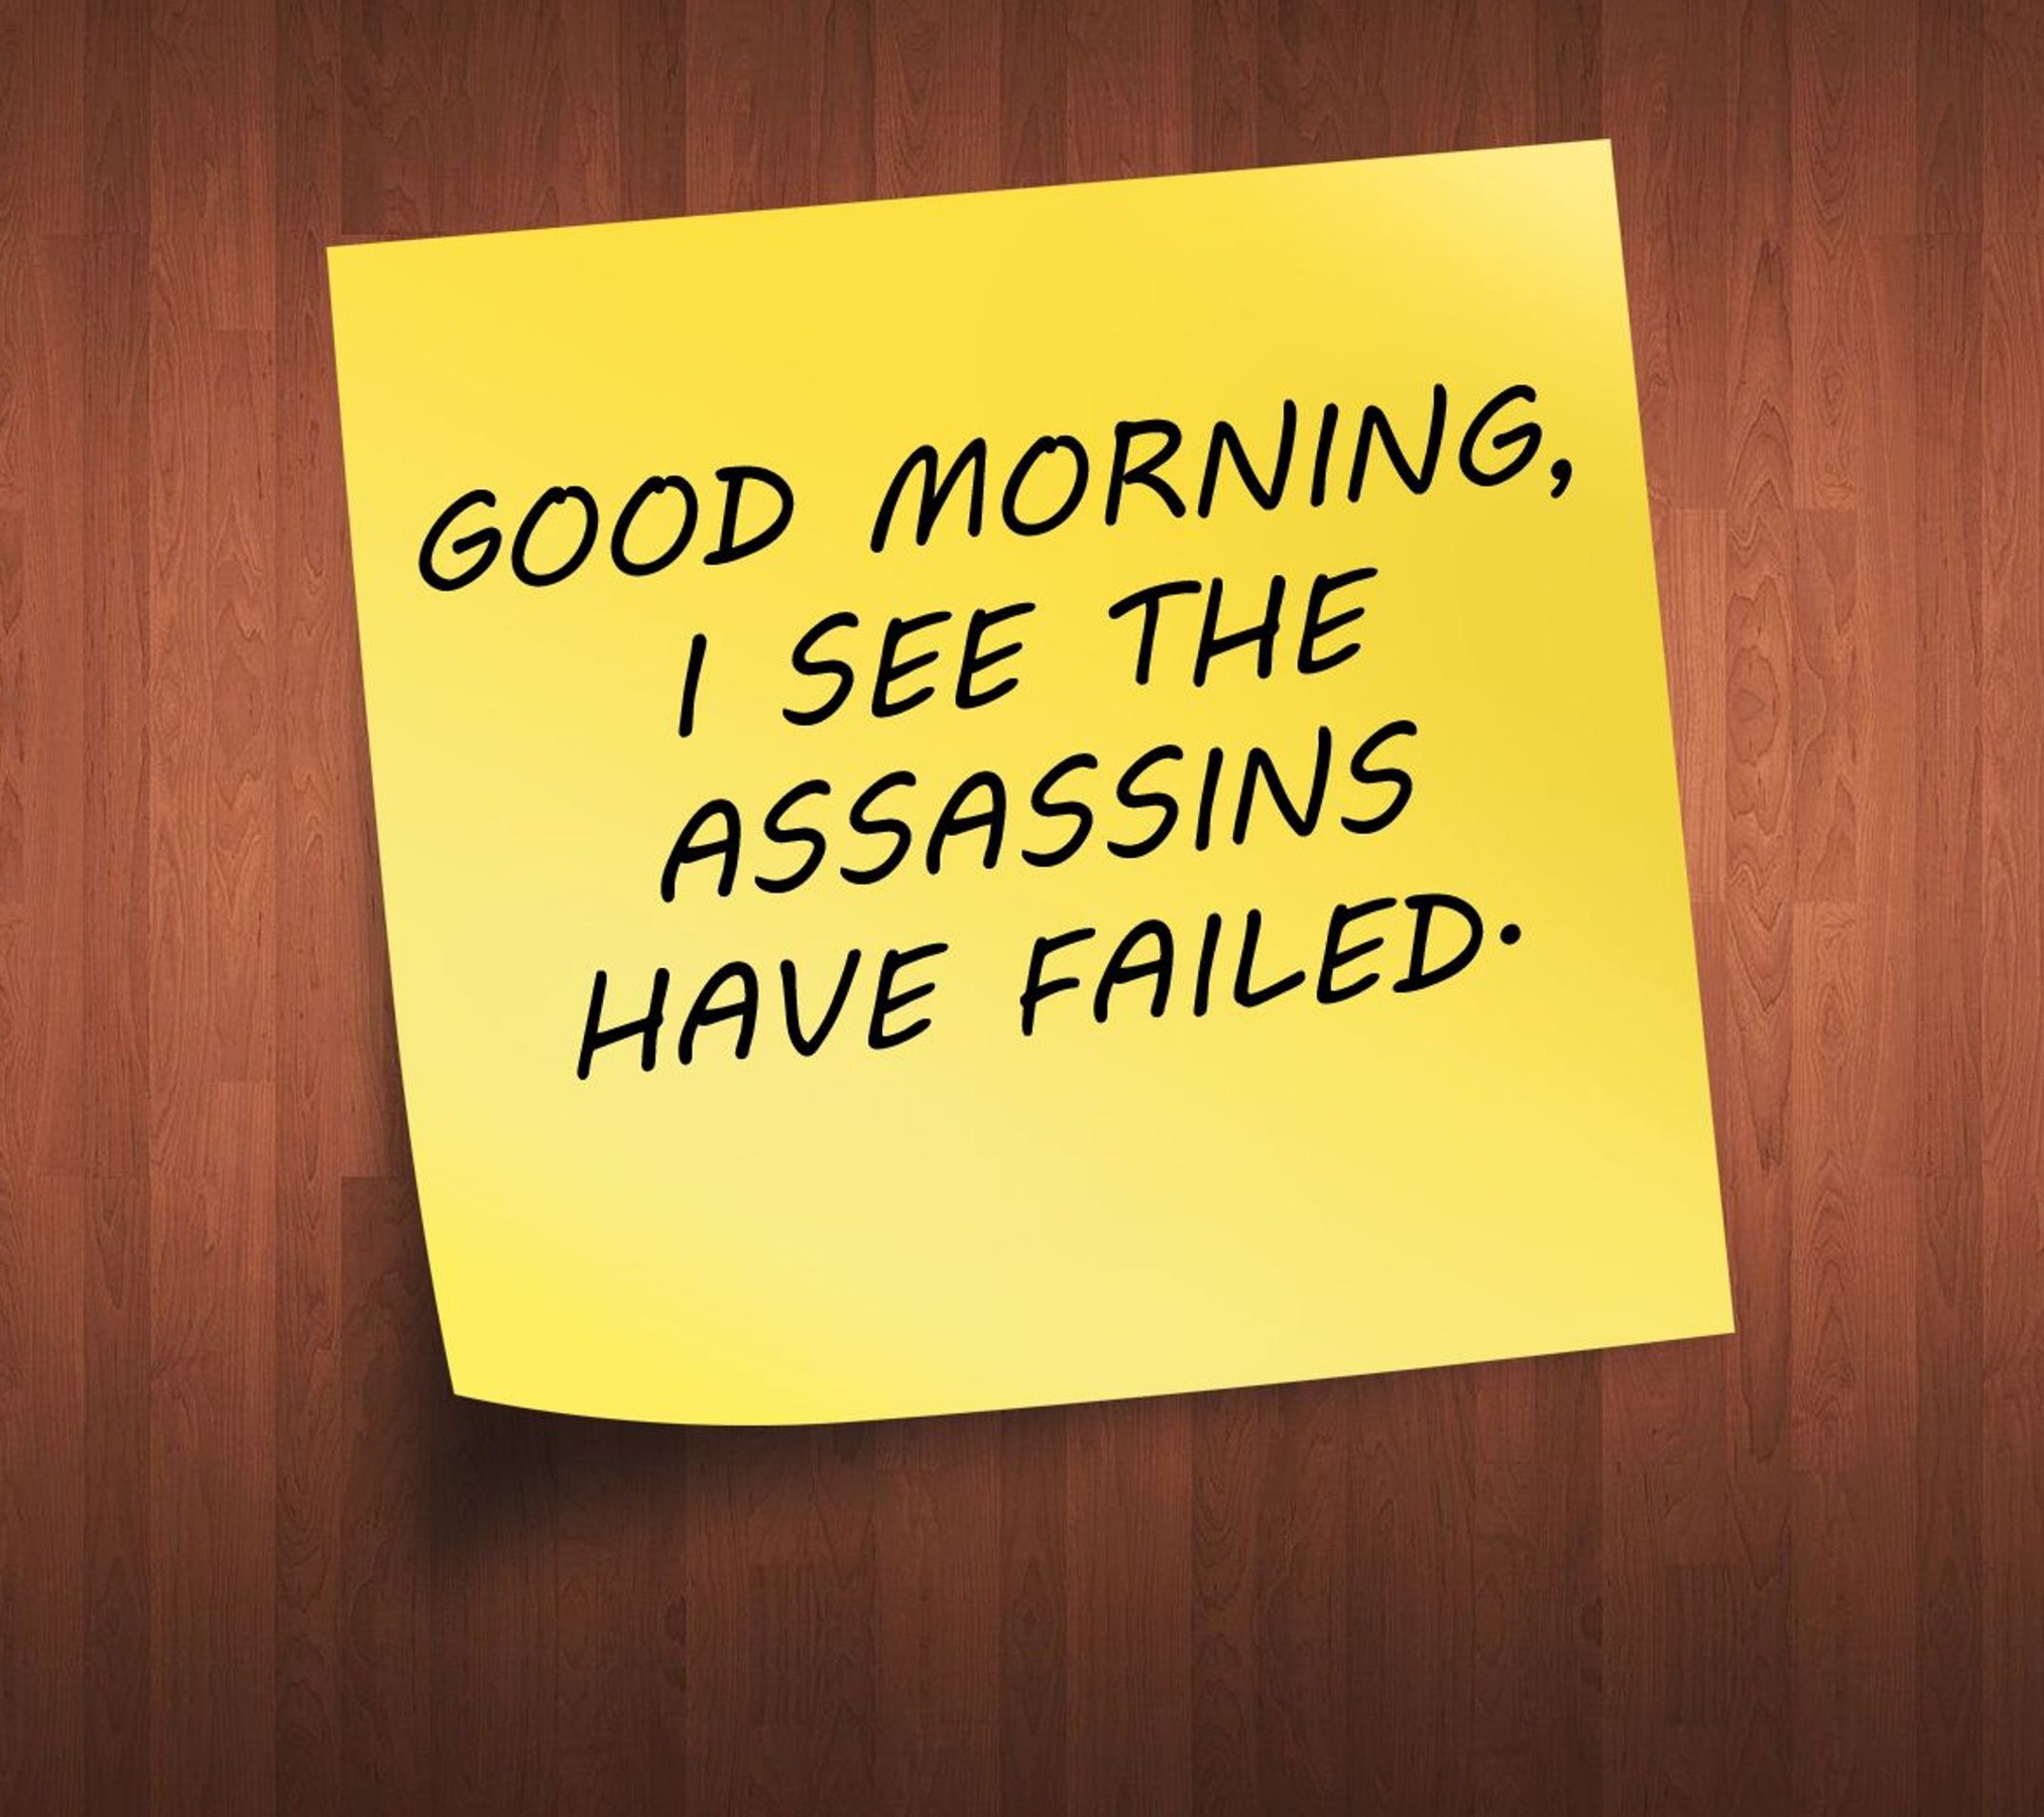 Download Good Morning - See The Assassins Have Failed , HD Wallpaper & Backgrounds